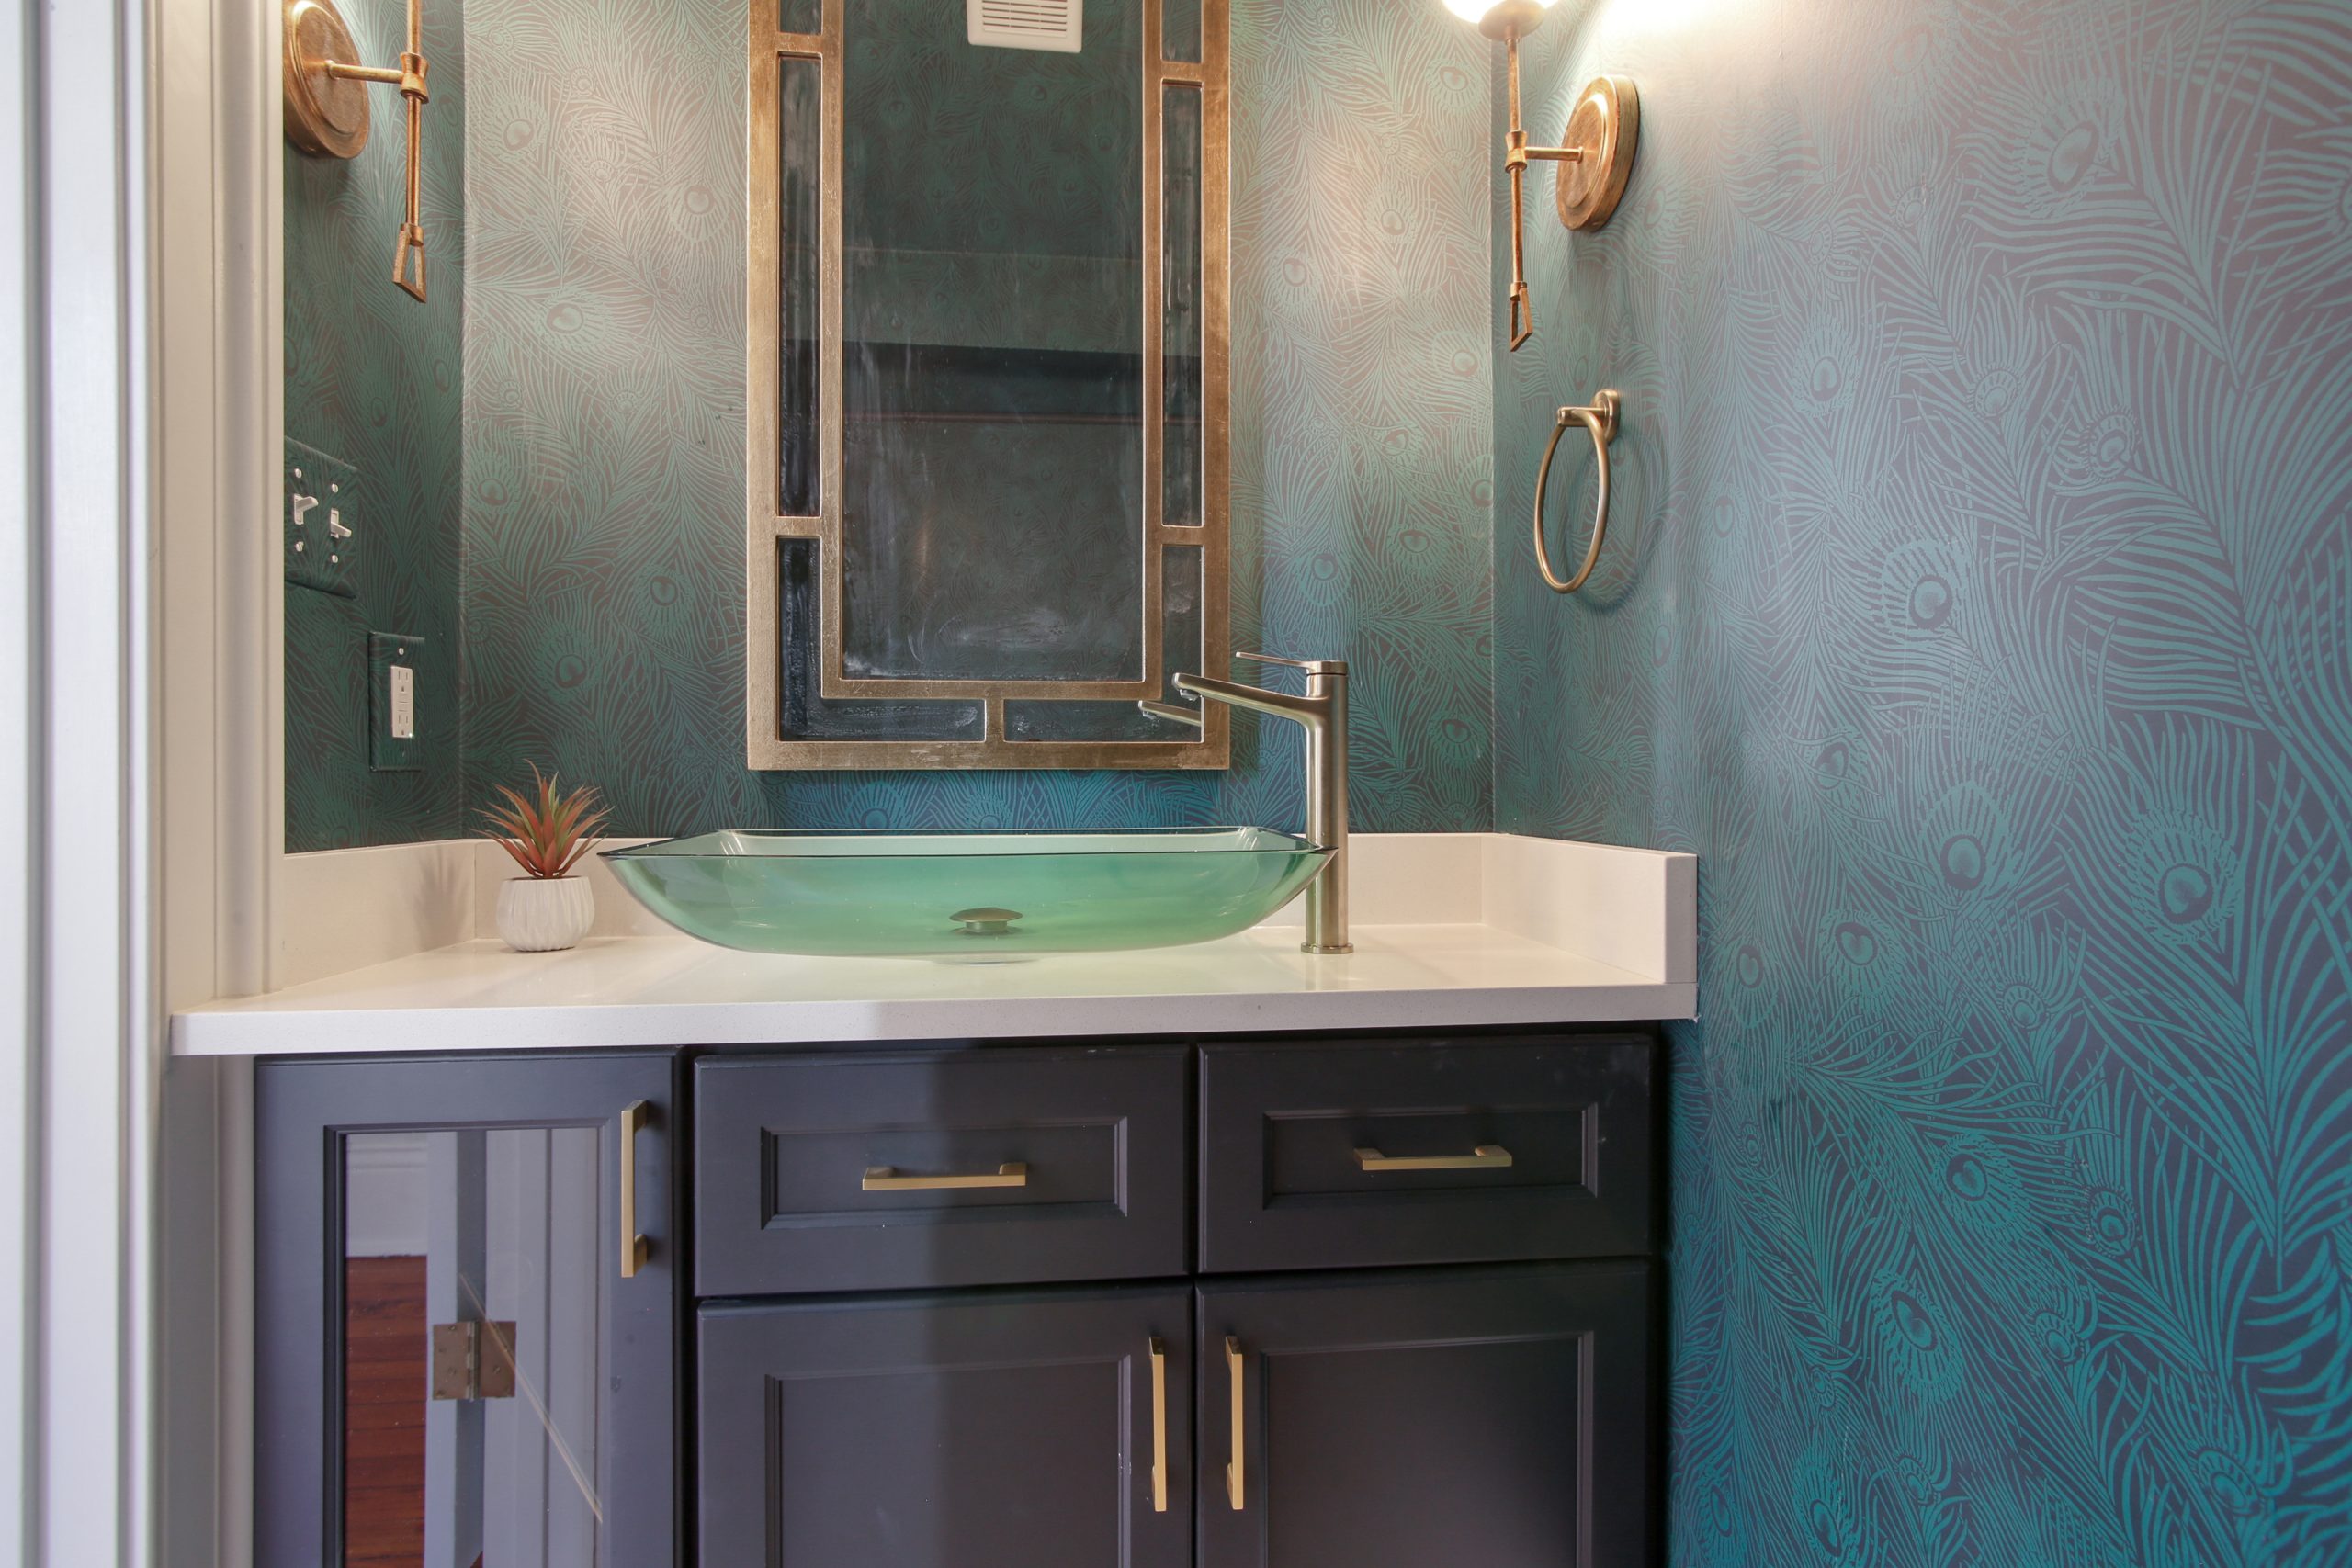 Grand House Luxury Historic Home Bathroom Renovation designed and built by DMG Design+Build